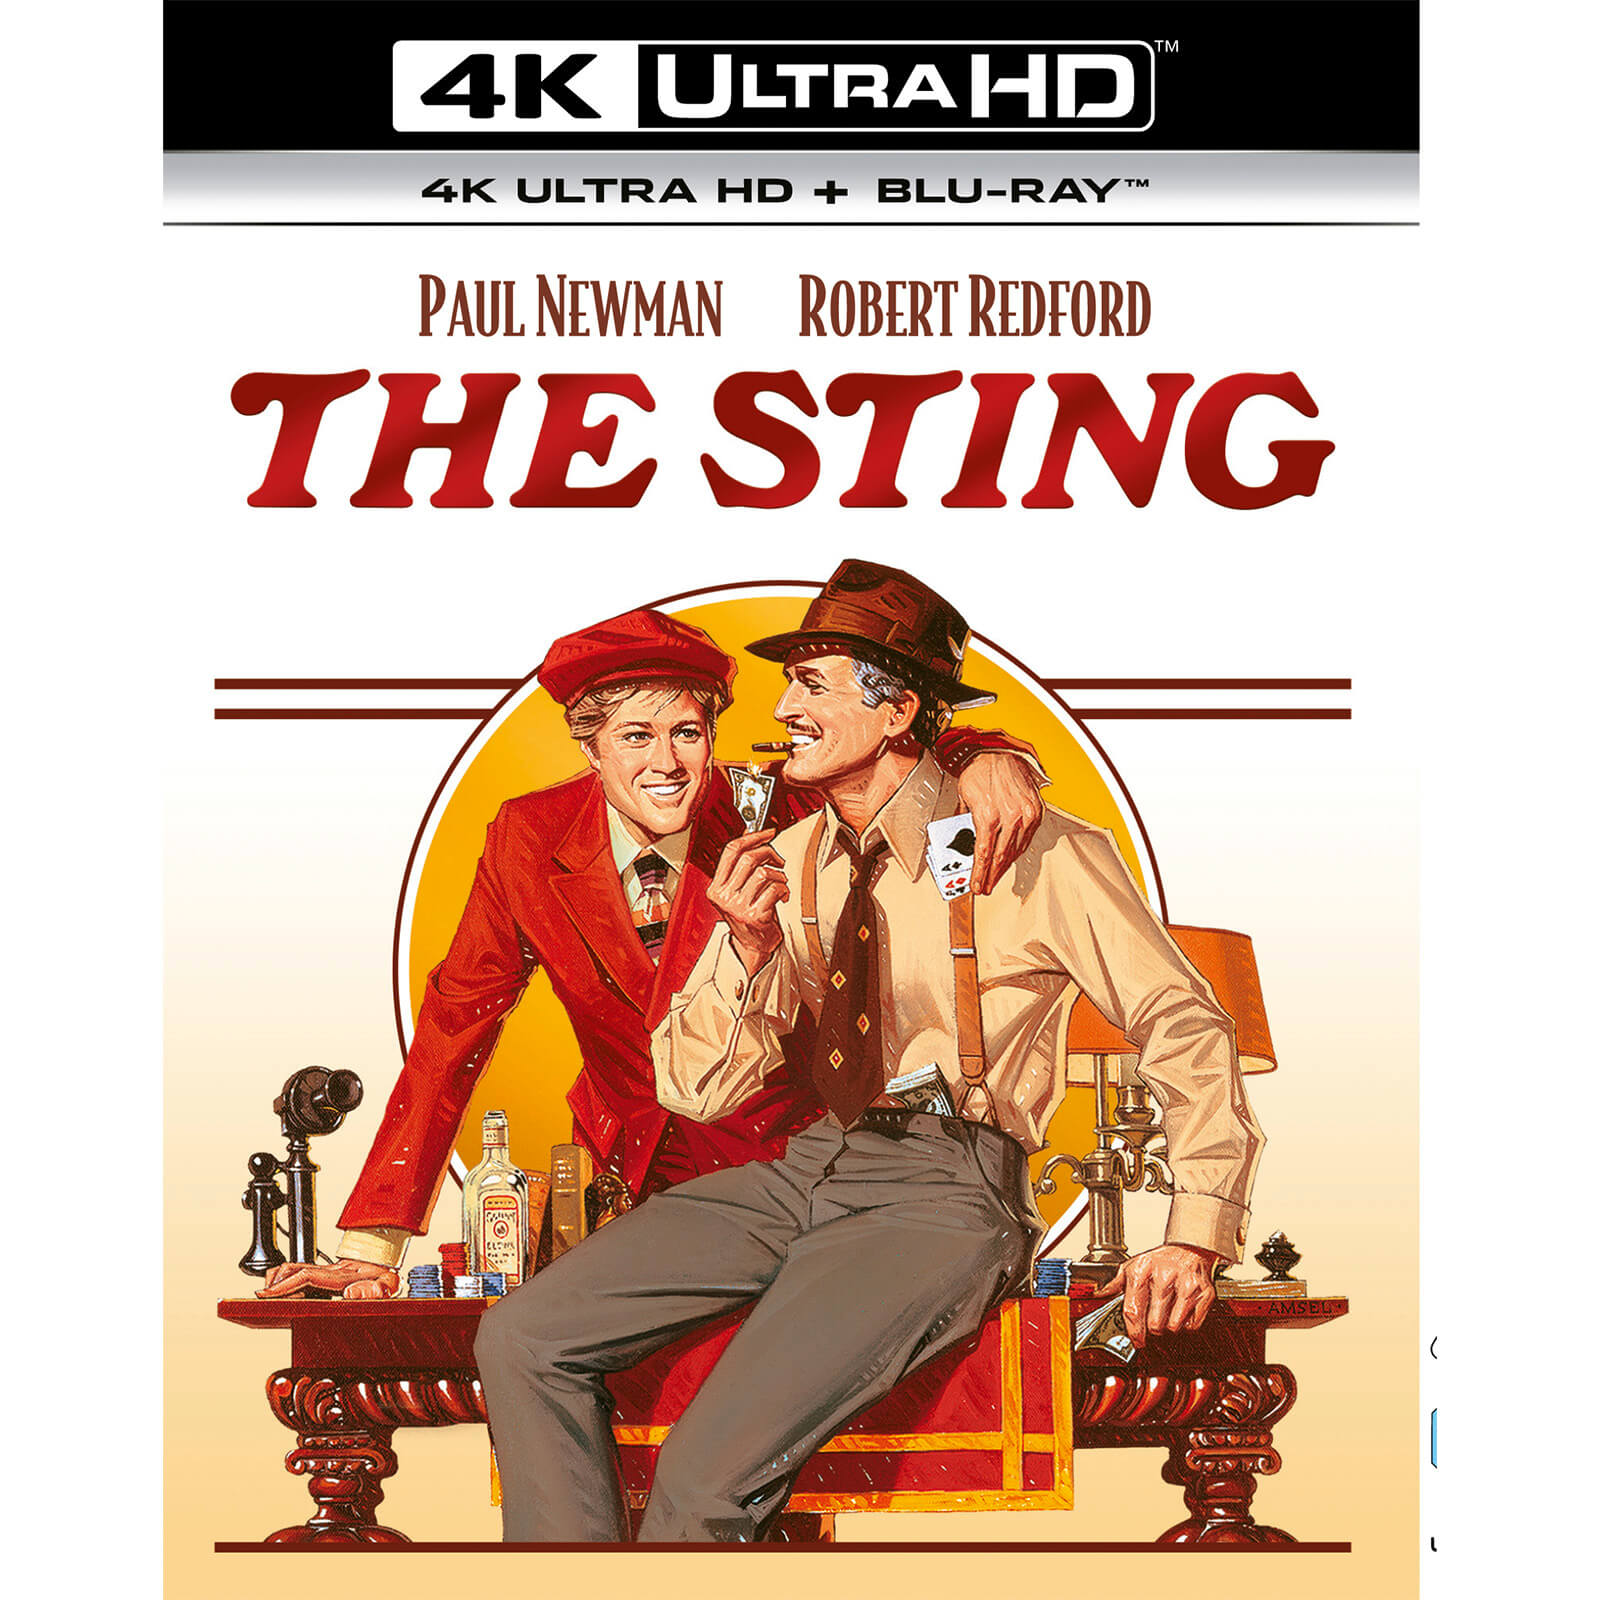 The Sting - 4K Ultra HD (Includes Blu-ray)